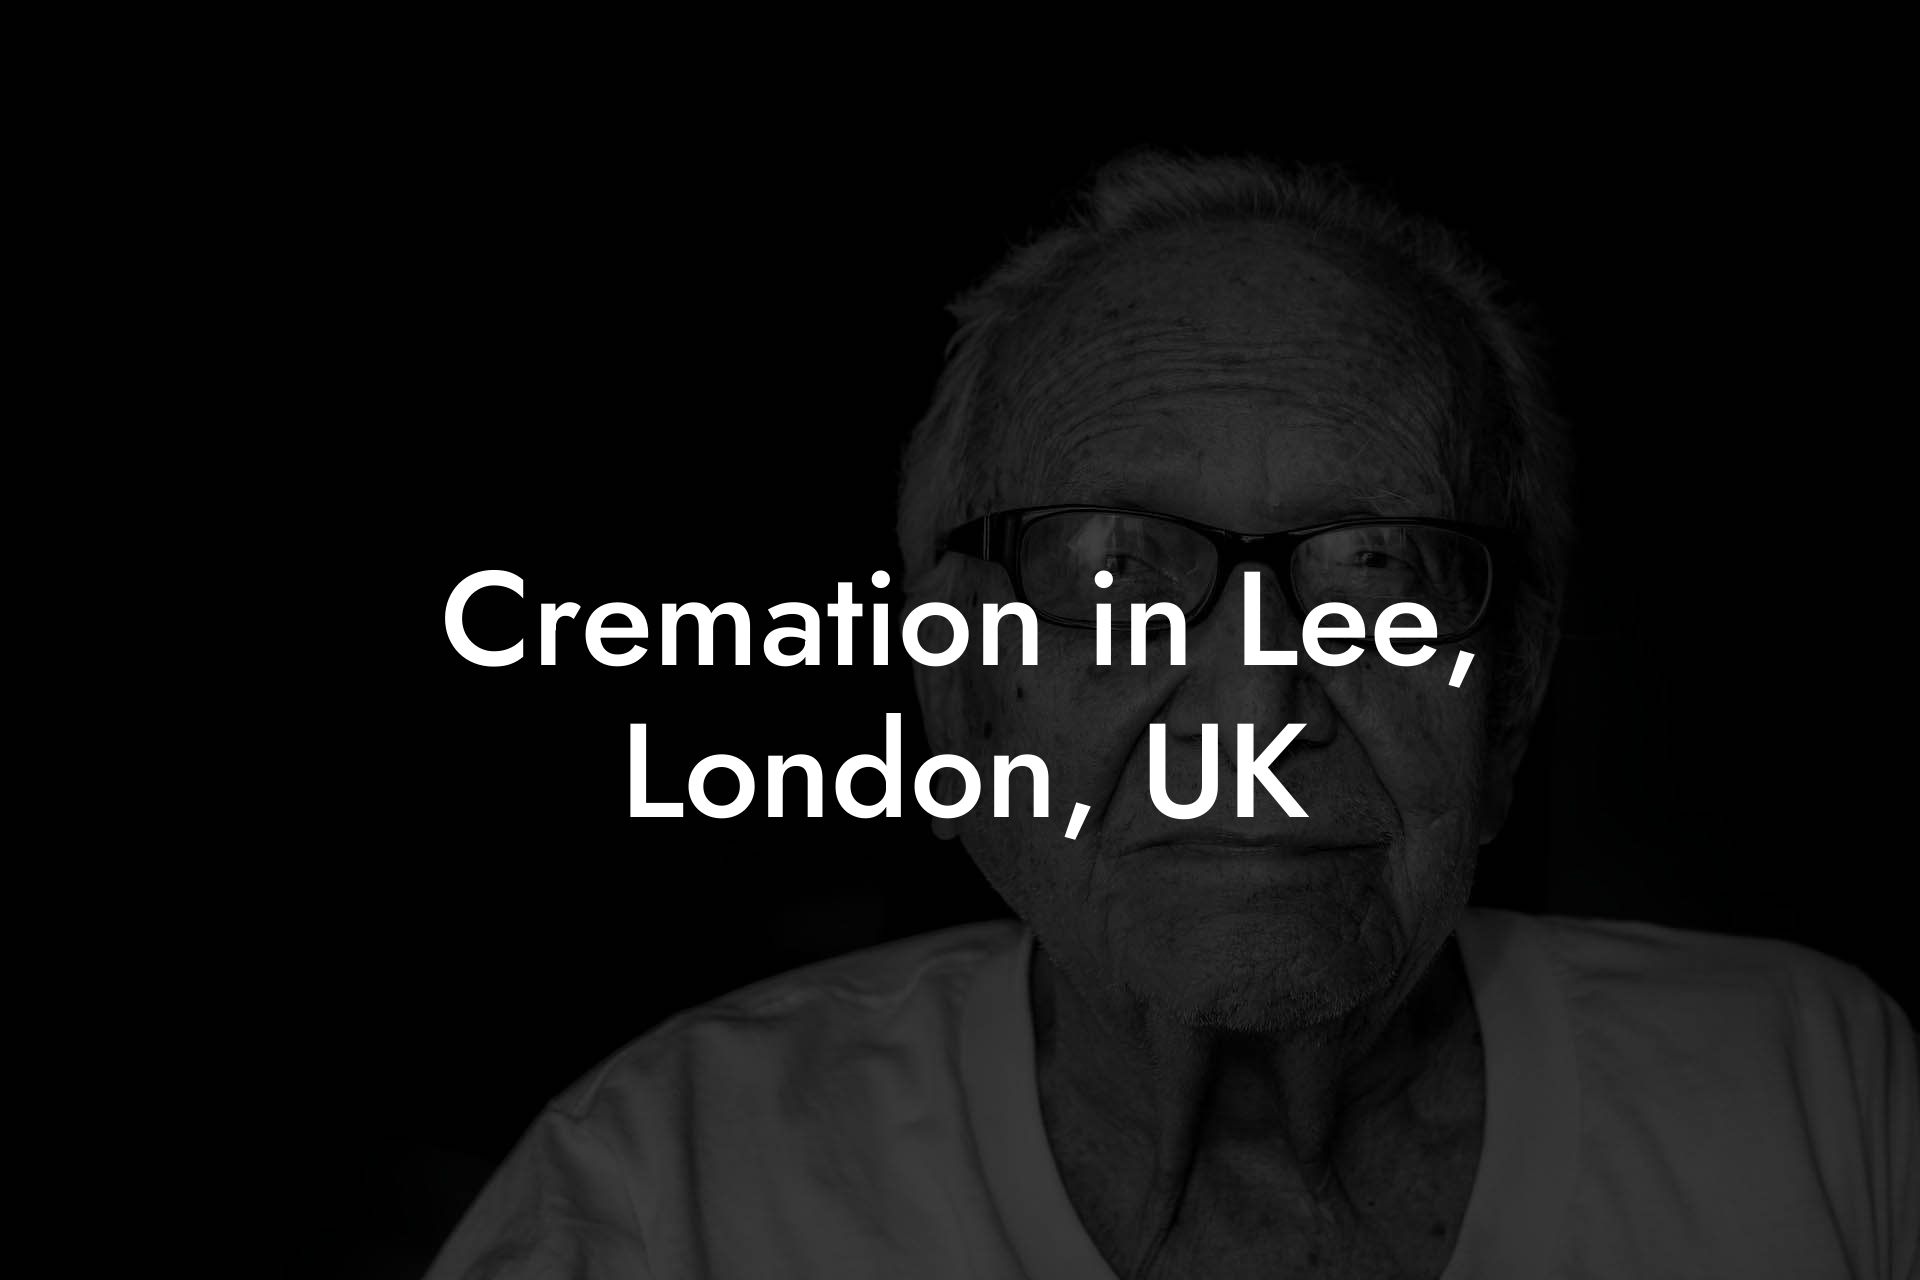 Cremation in Lee, London, UK